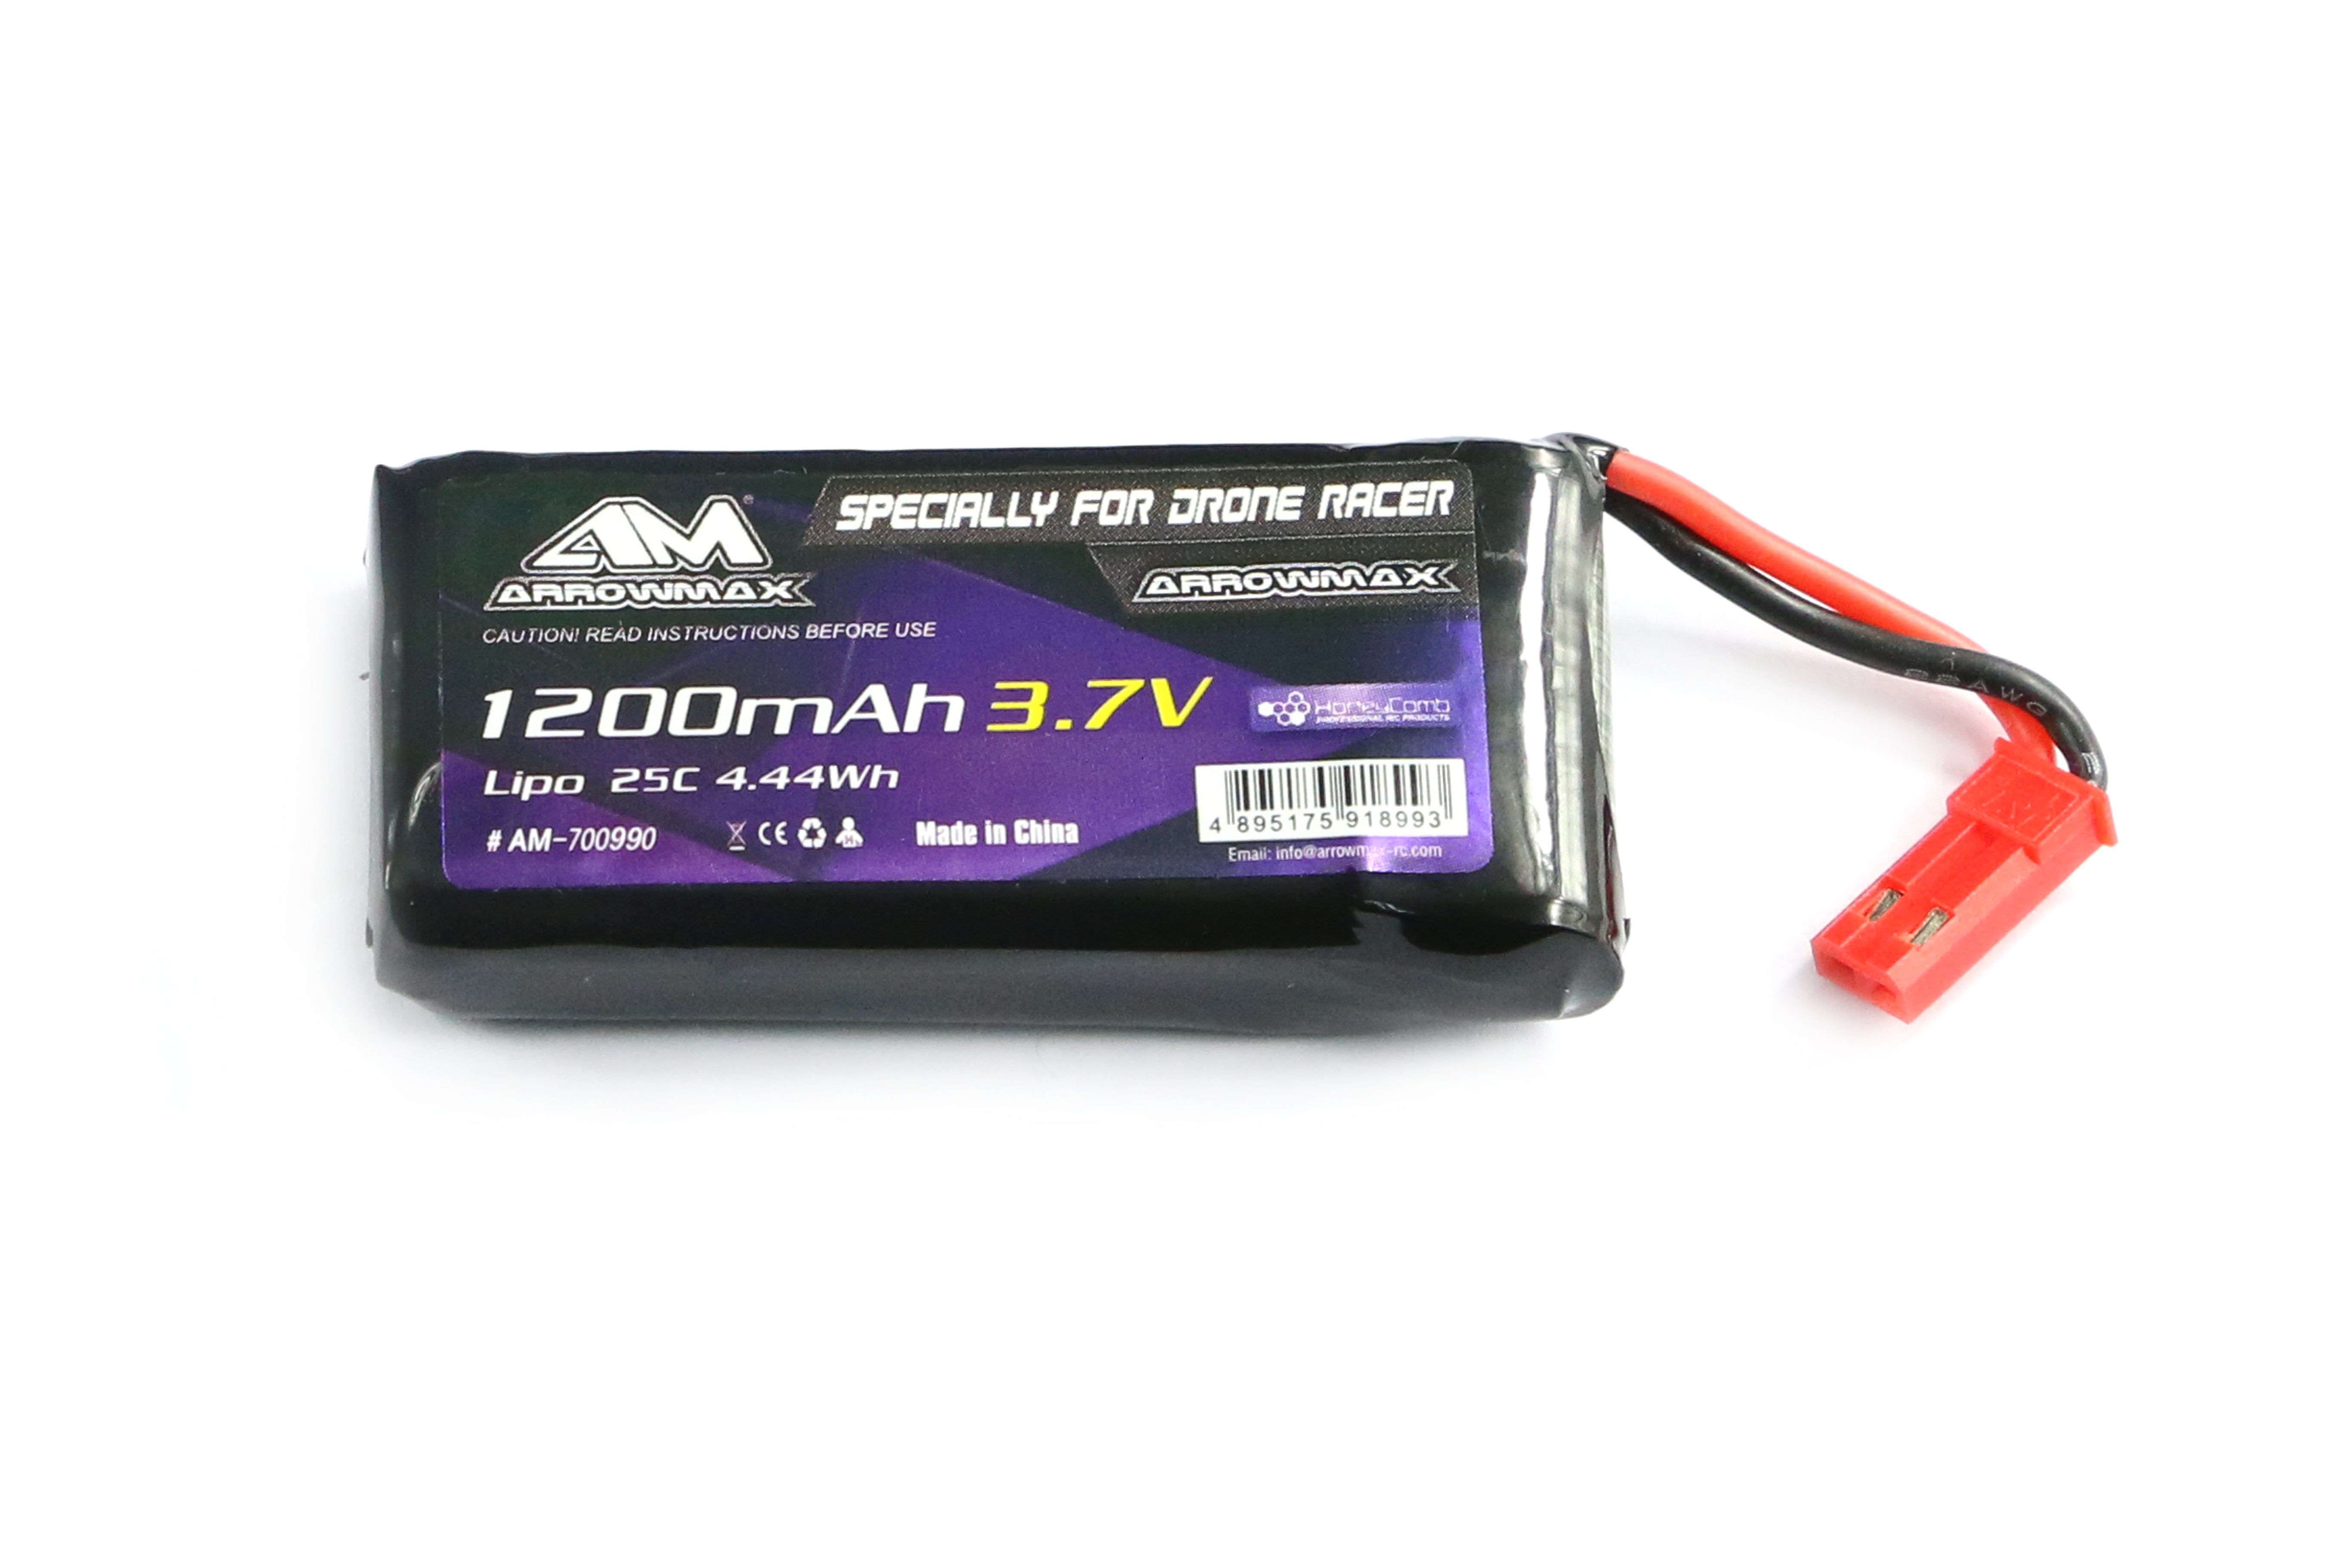 AM Lipo 1200mAh 3.7V Specially For Kyosho Drone Racer (AM-700990)